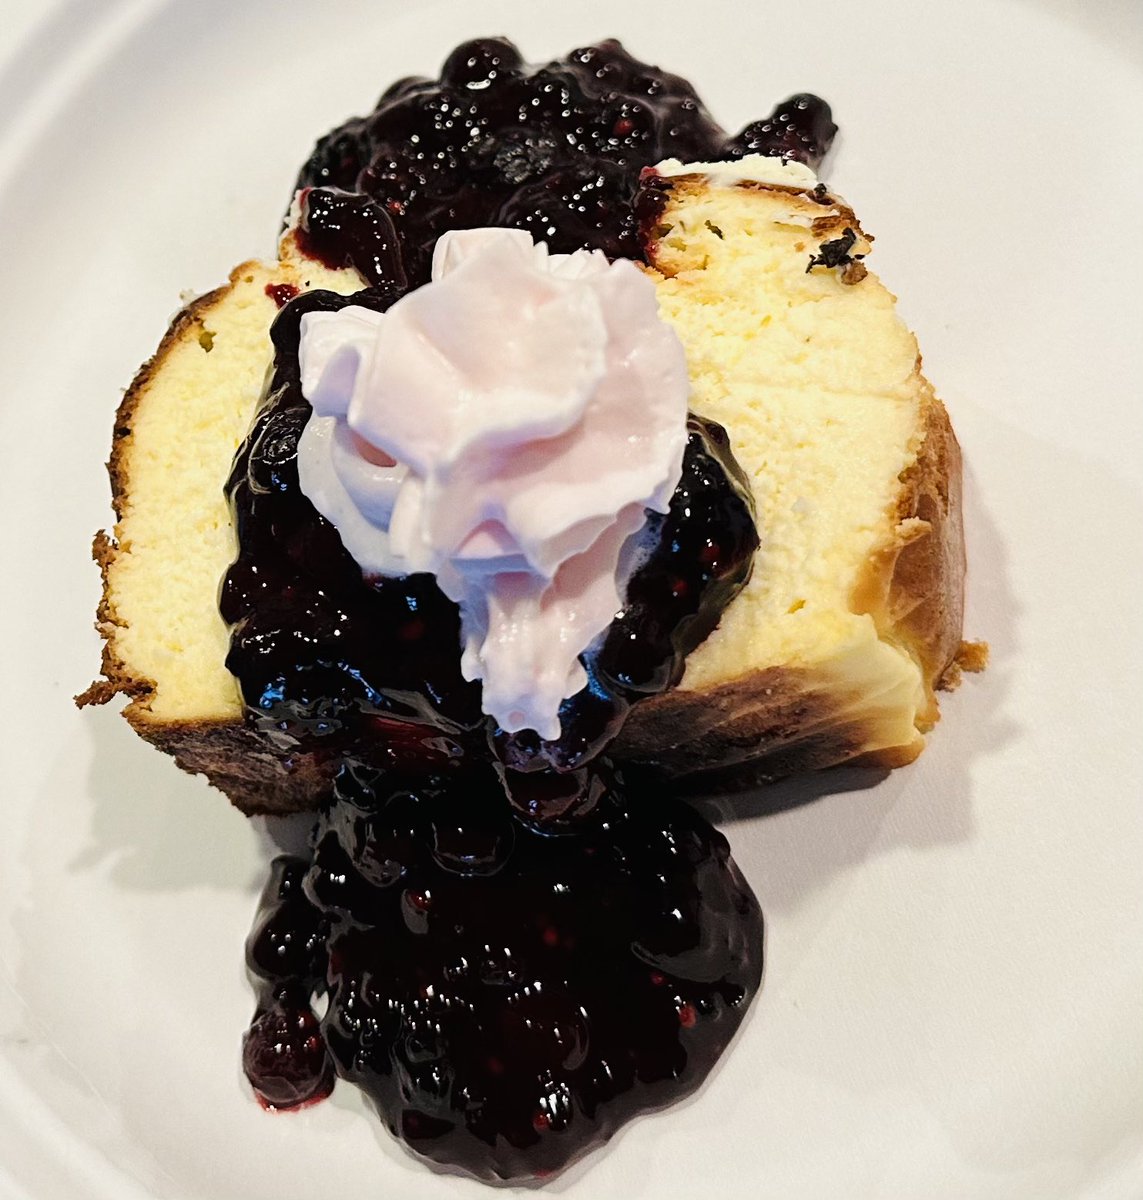 I made basque cheesecake with huckleberry/mulberry sauce.